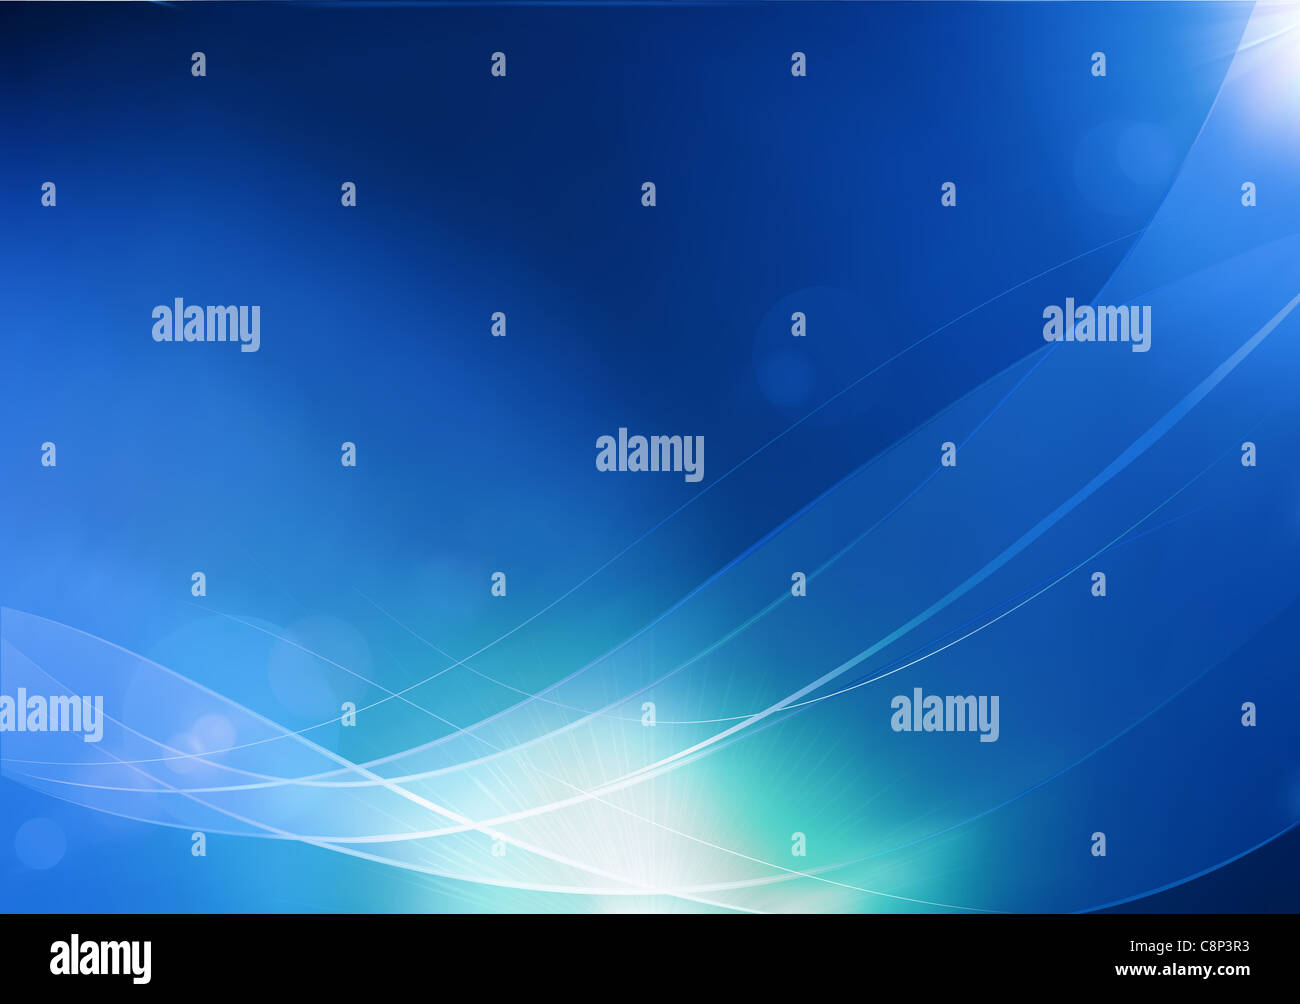 illustration of blue abstract background made of light splashes and curved lines Stock Photo